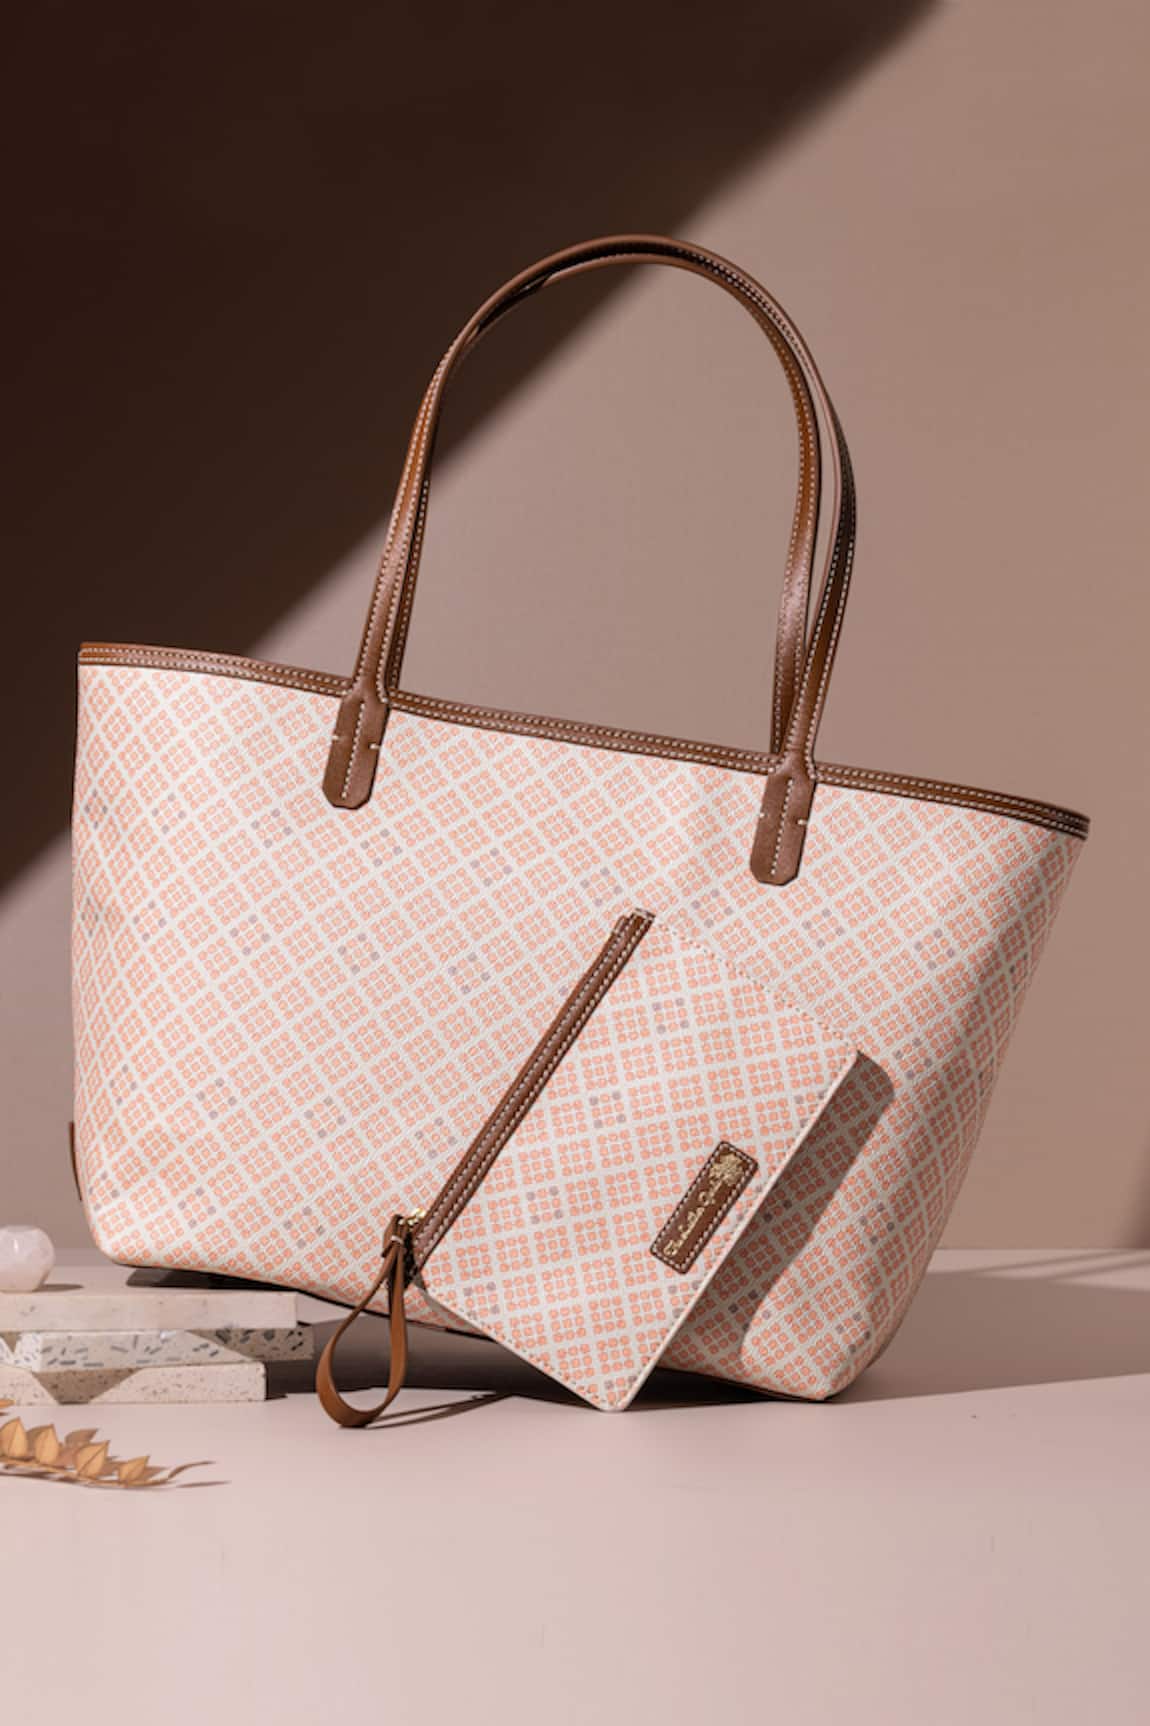 The Leather Garden Leather Geometric Pattern Tote Bag